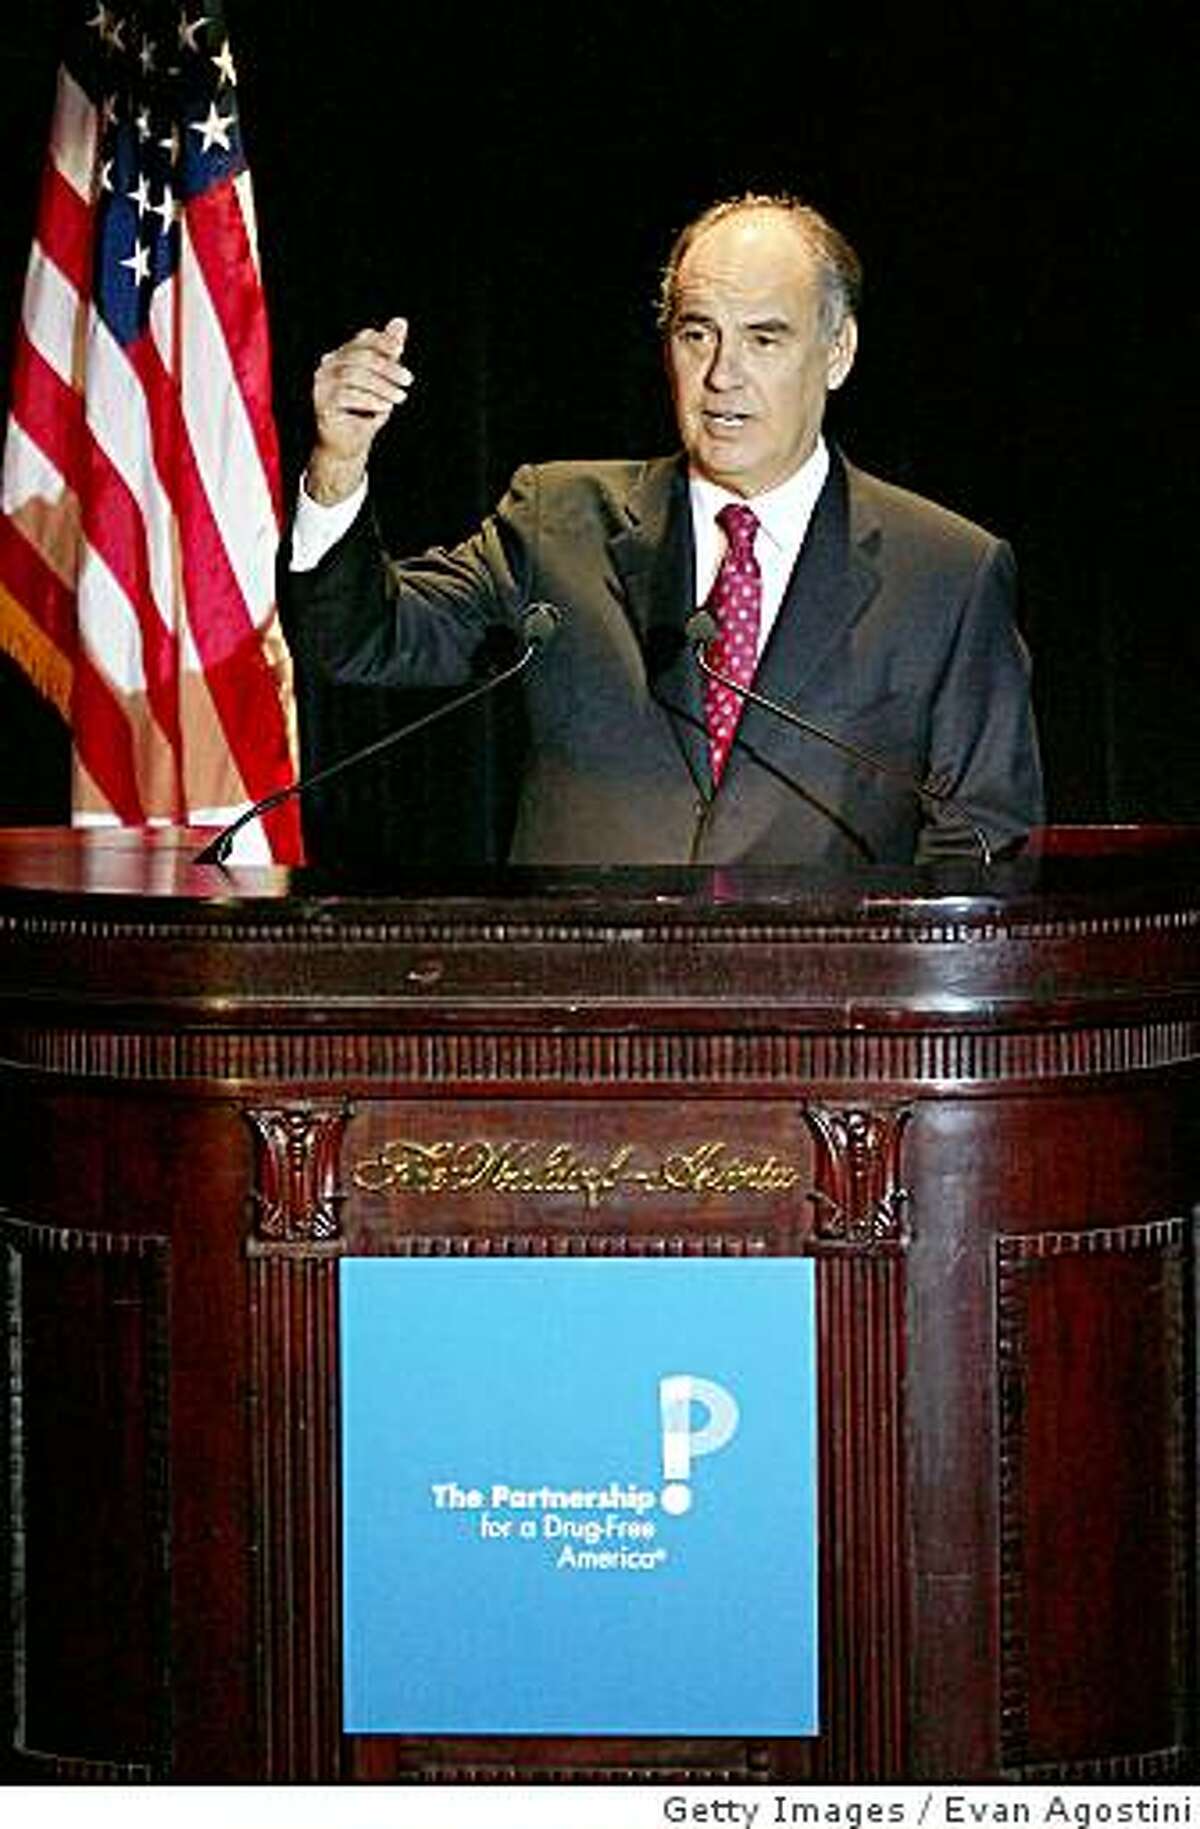 NEW YORK - NOVEMBER 29: The Partnership for a Drug-Free America Chairman Roy Bostock speaks at the Partnership for a Drug-Free America 'Making A Difference Gala' at the Waldorf-Astoria, November 29, 2004 in New York City. (Photo by Evan Agostini/Getty Images)